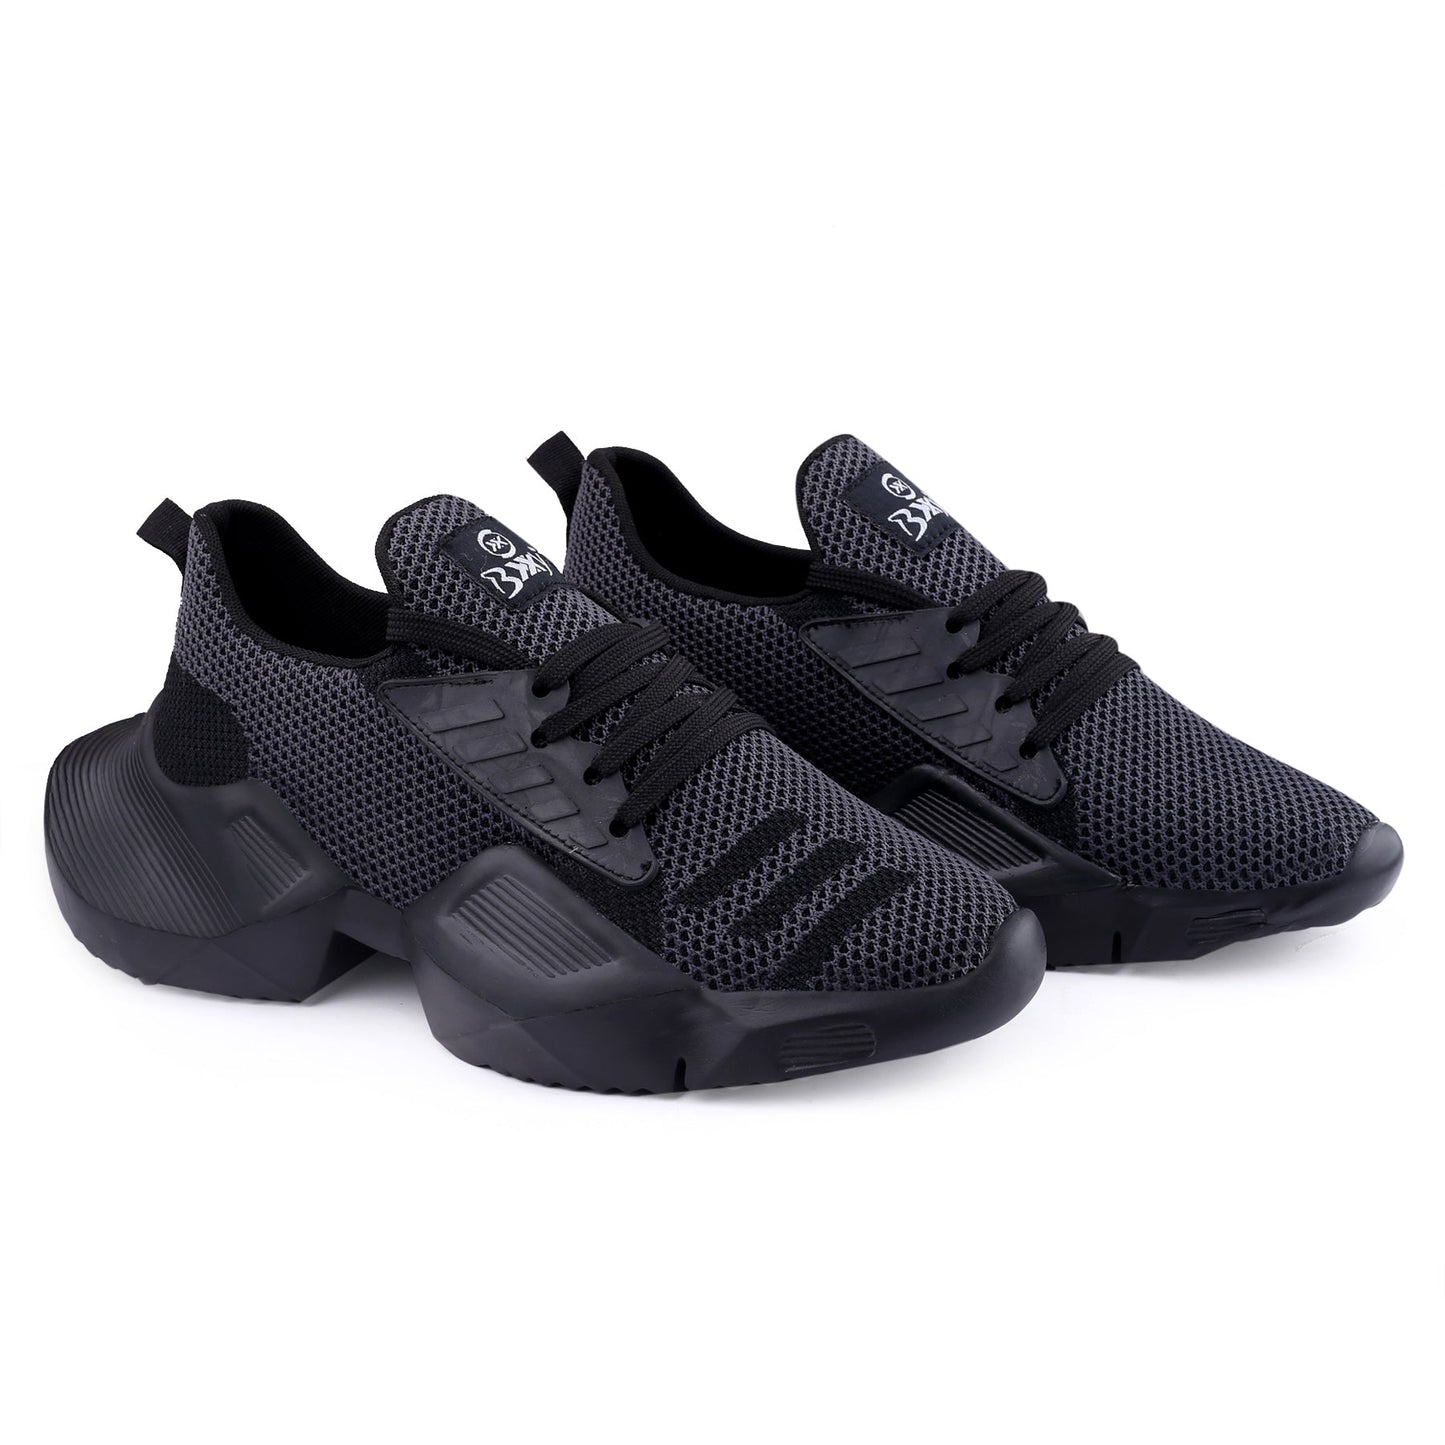 Bxxy Men's High-end Fashion Sports Running Shoes